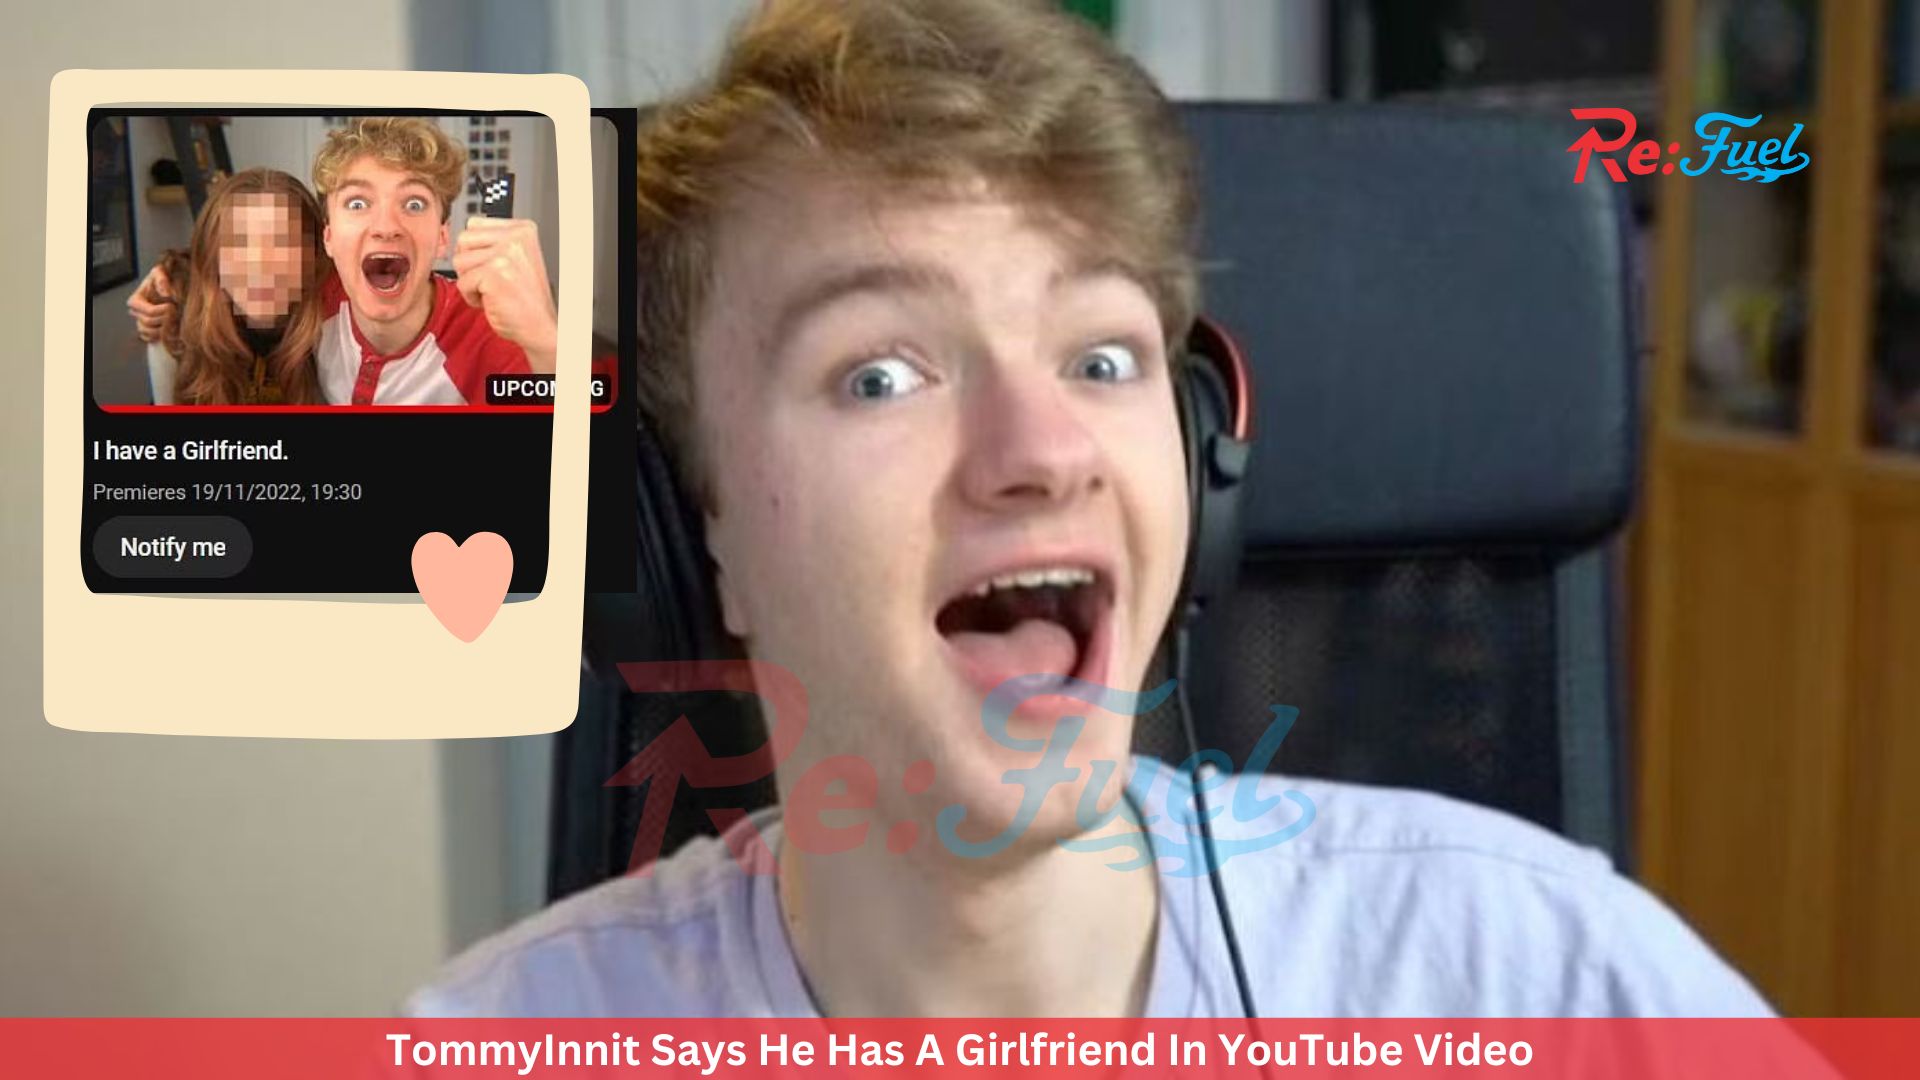 TommyInnit Says He Has A Girlfriend In YouTube Video